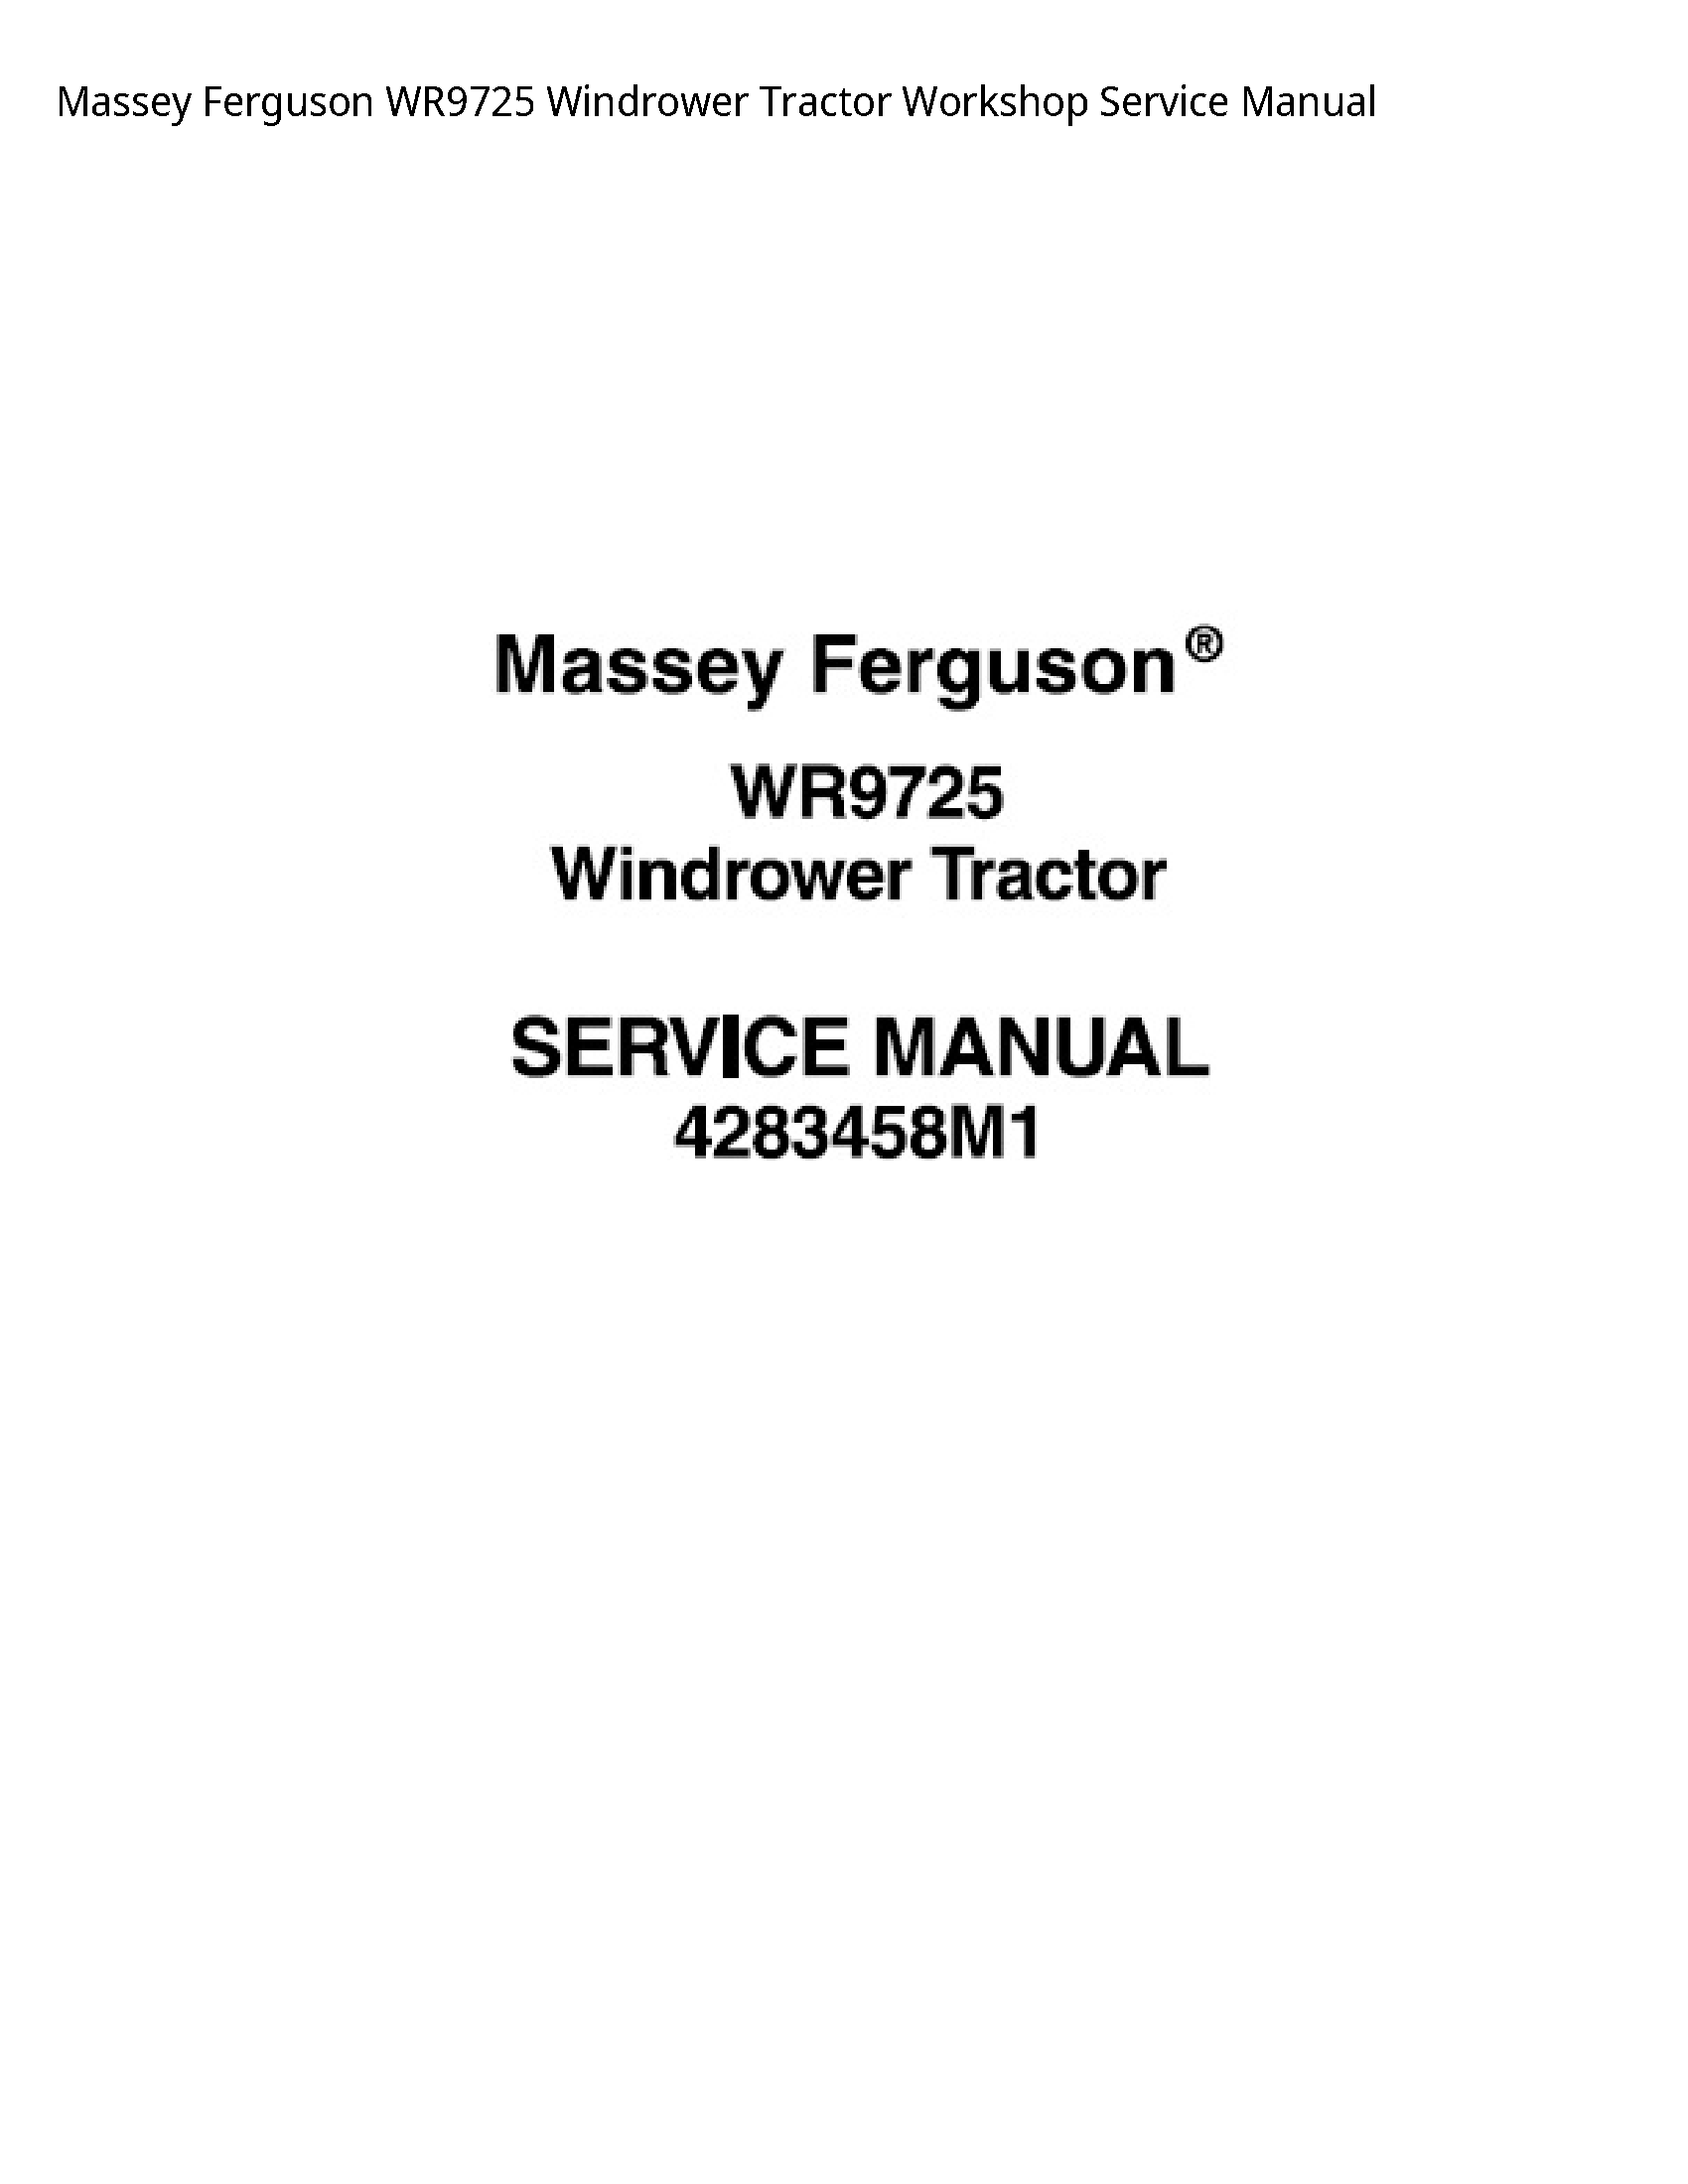 Massey Ferguson WR9725 Windrower Tractor Service manual